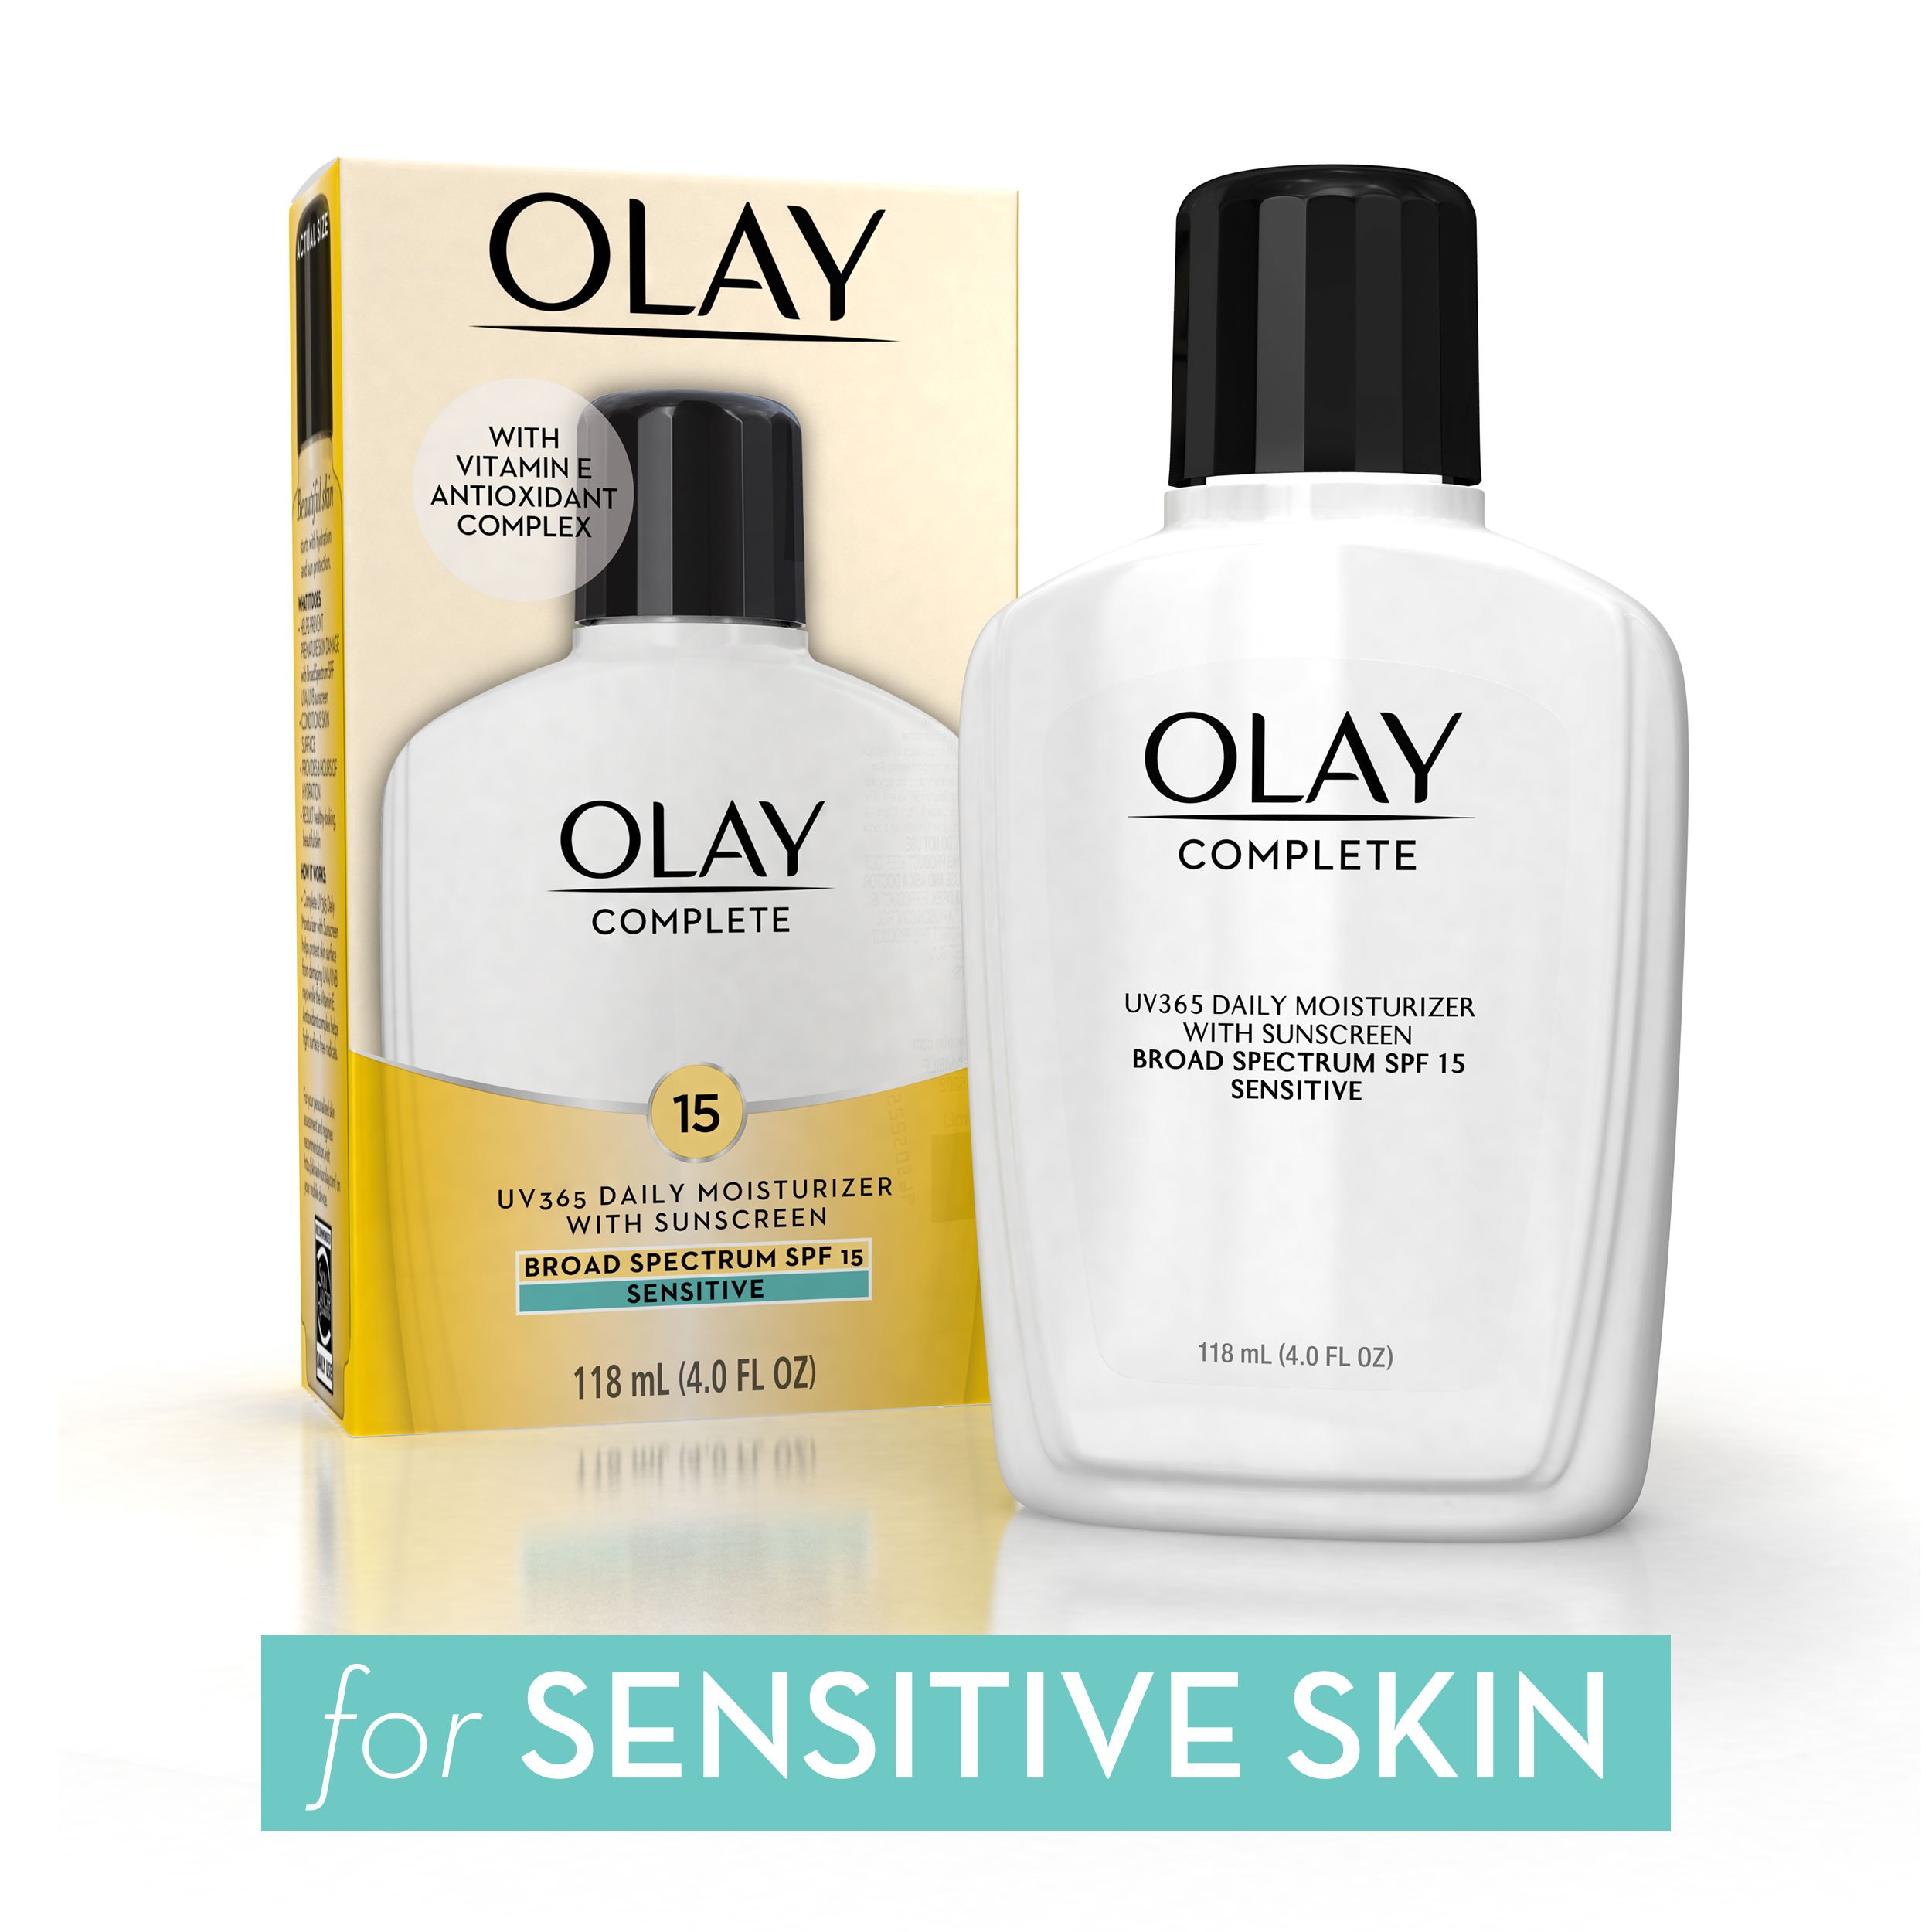 Face Moisturizer by Olay, Complete All Day Moisturizer With Sunscreen Broad Spectrum SPF 15 - Sensitive, 4 fl. Oz, 1 unit